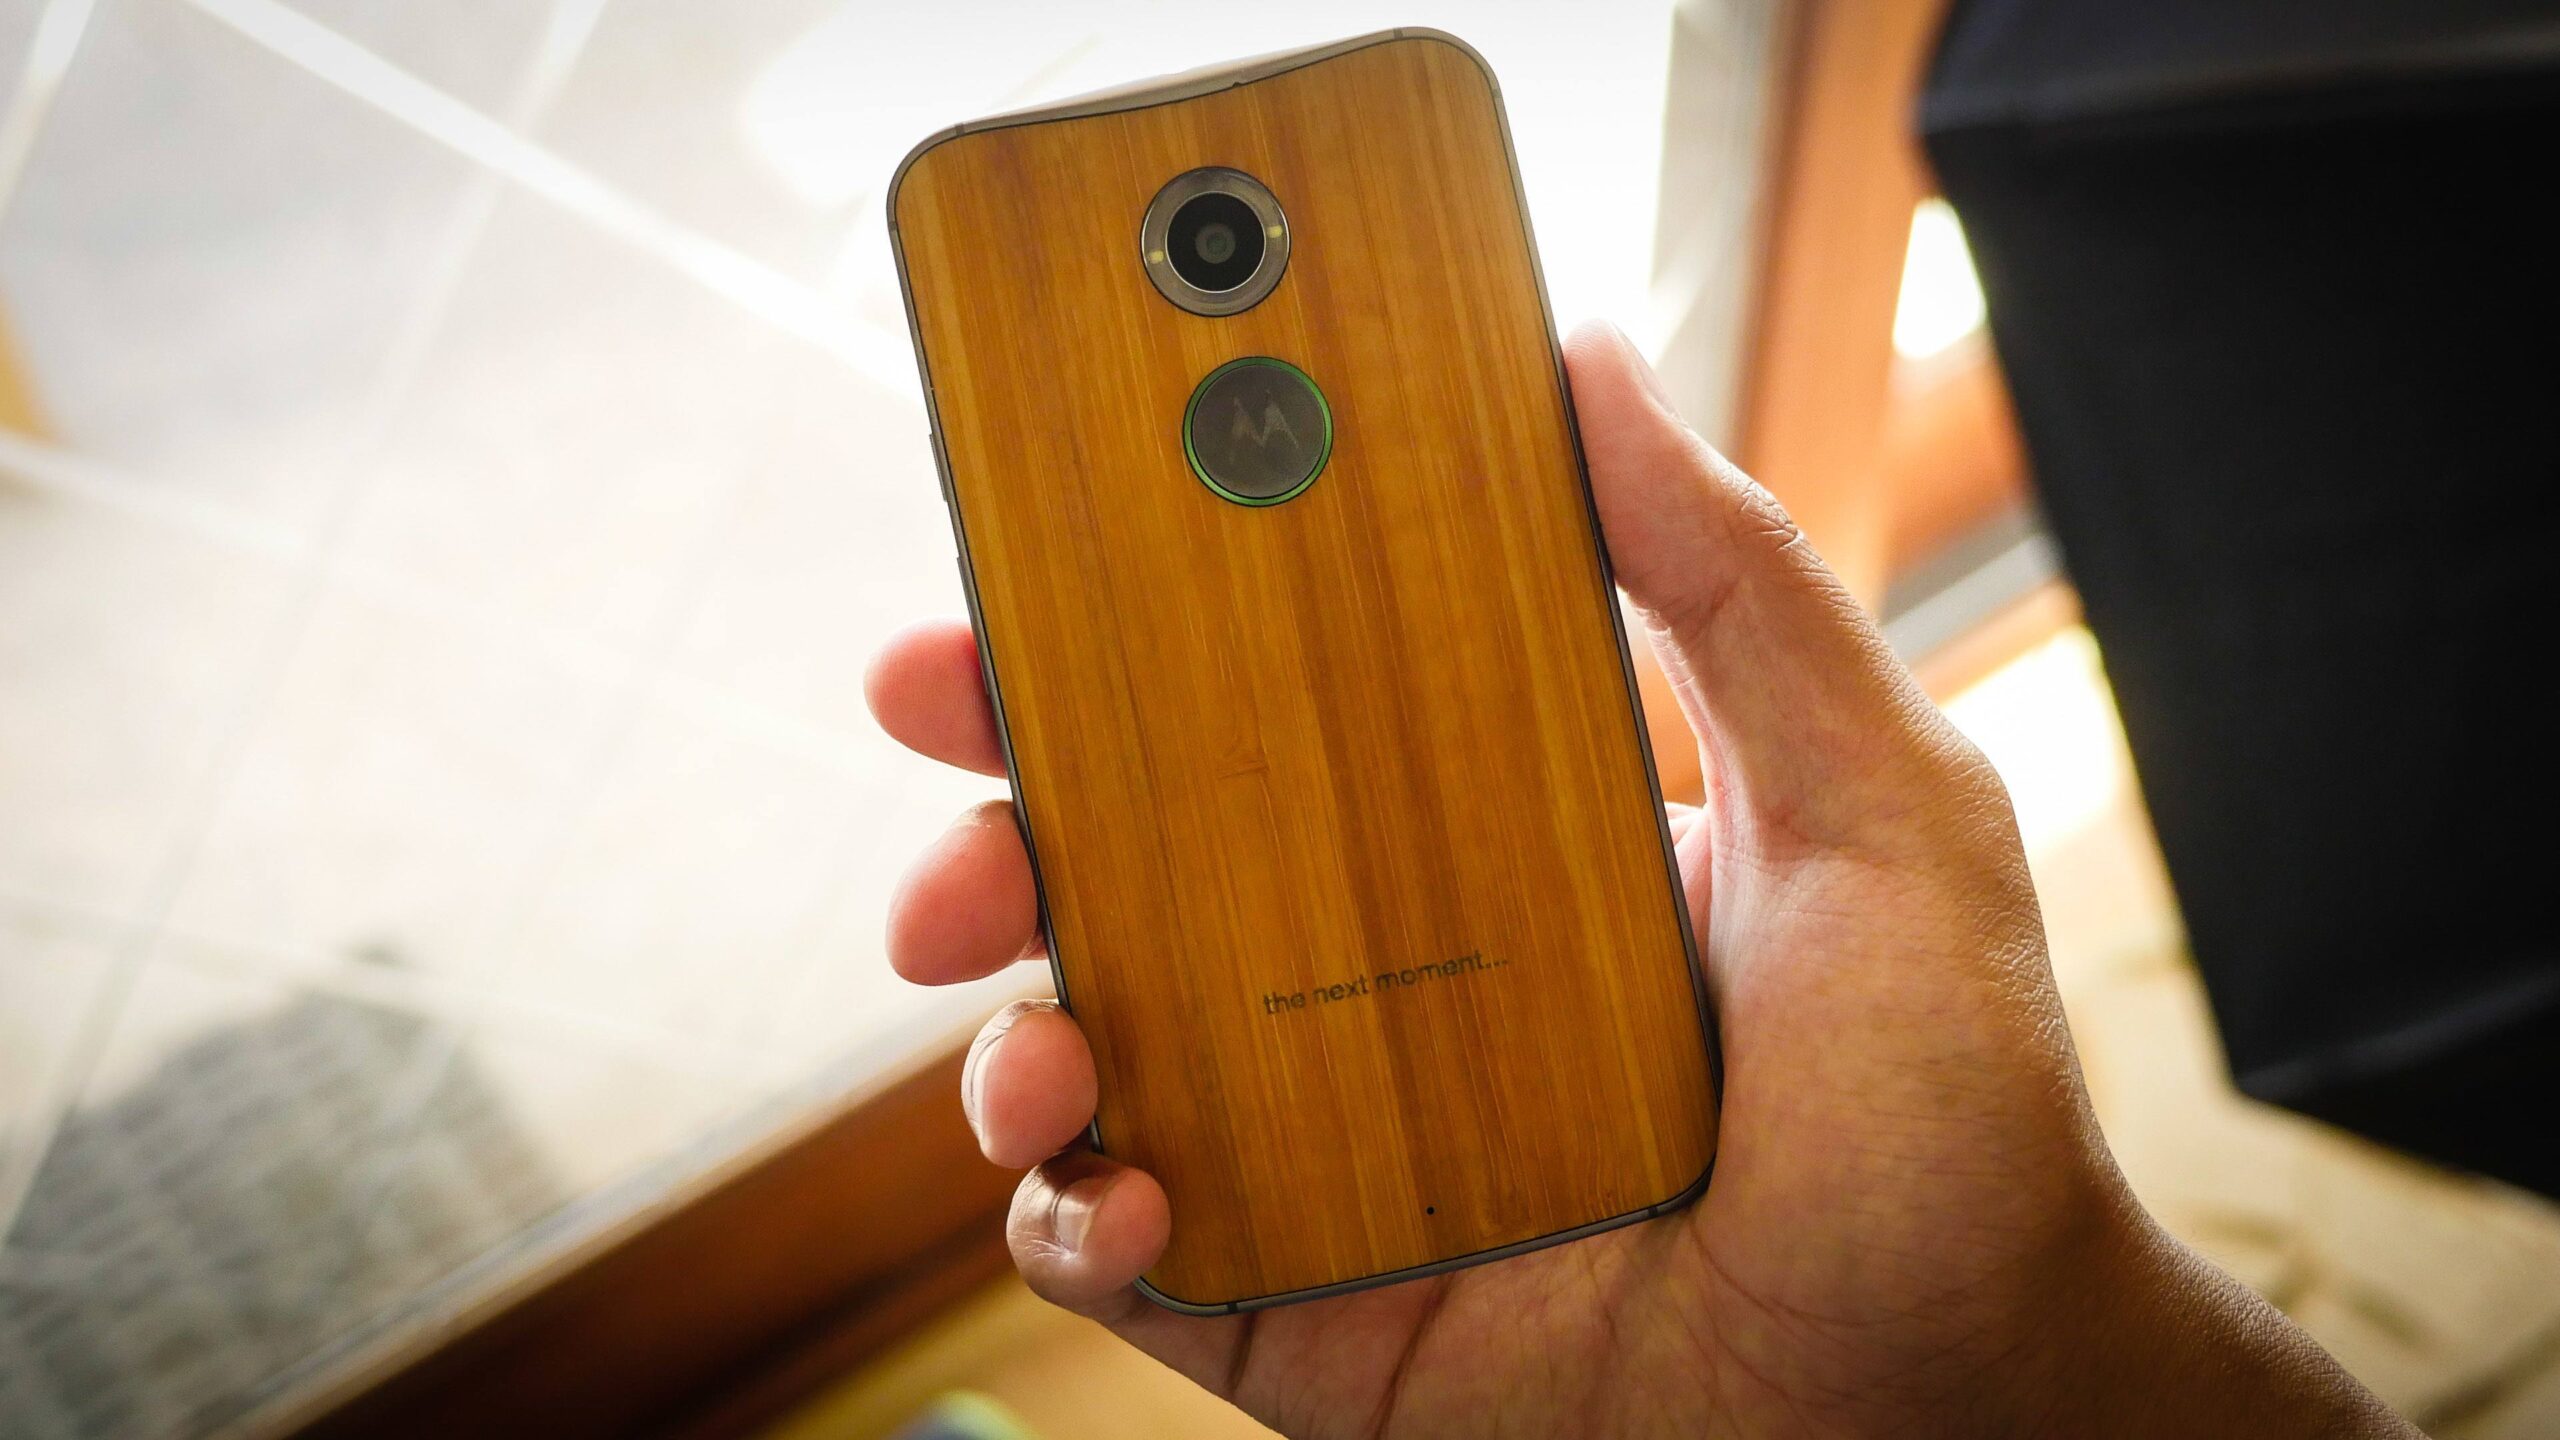 moto x 2014 first impressions (10 of 18)